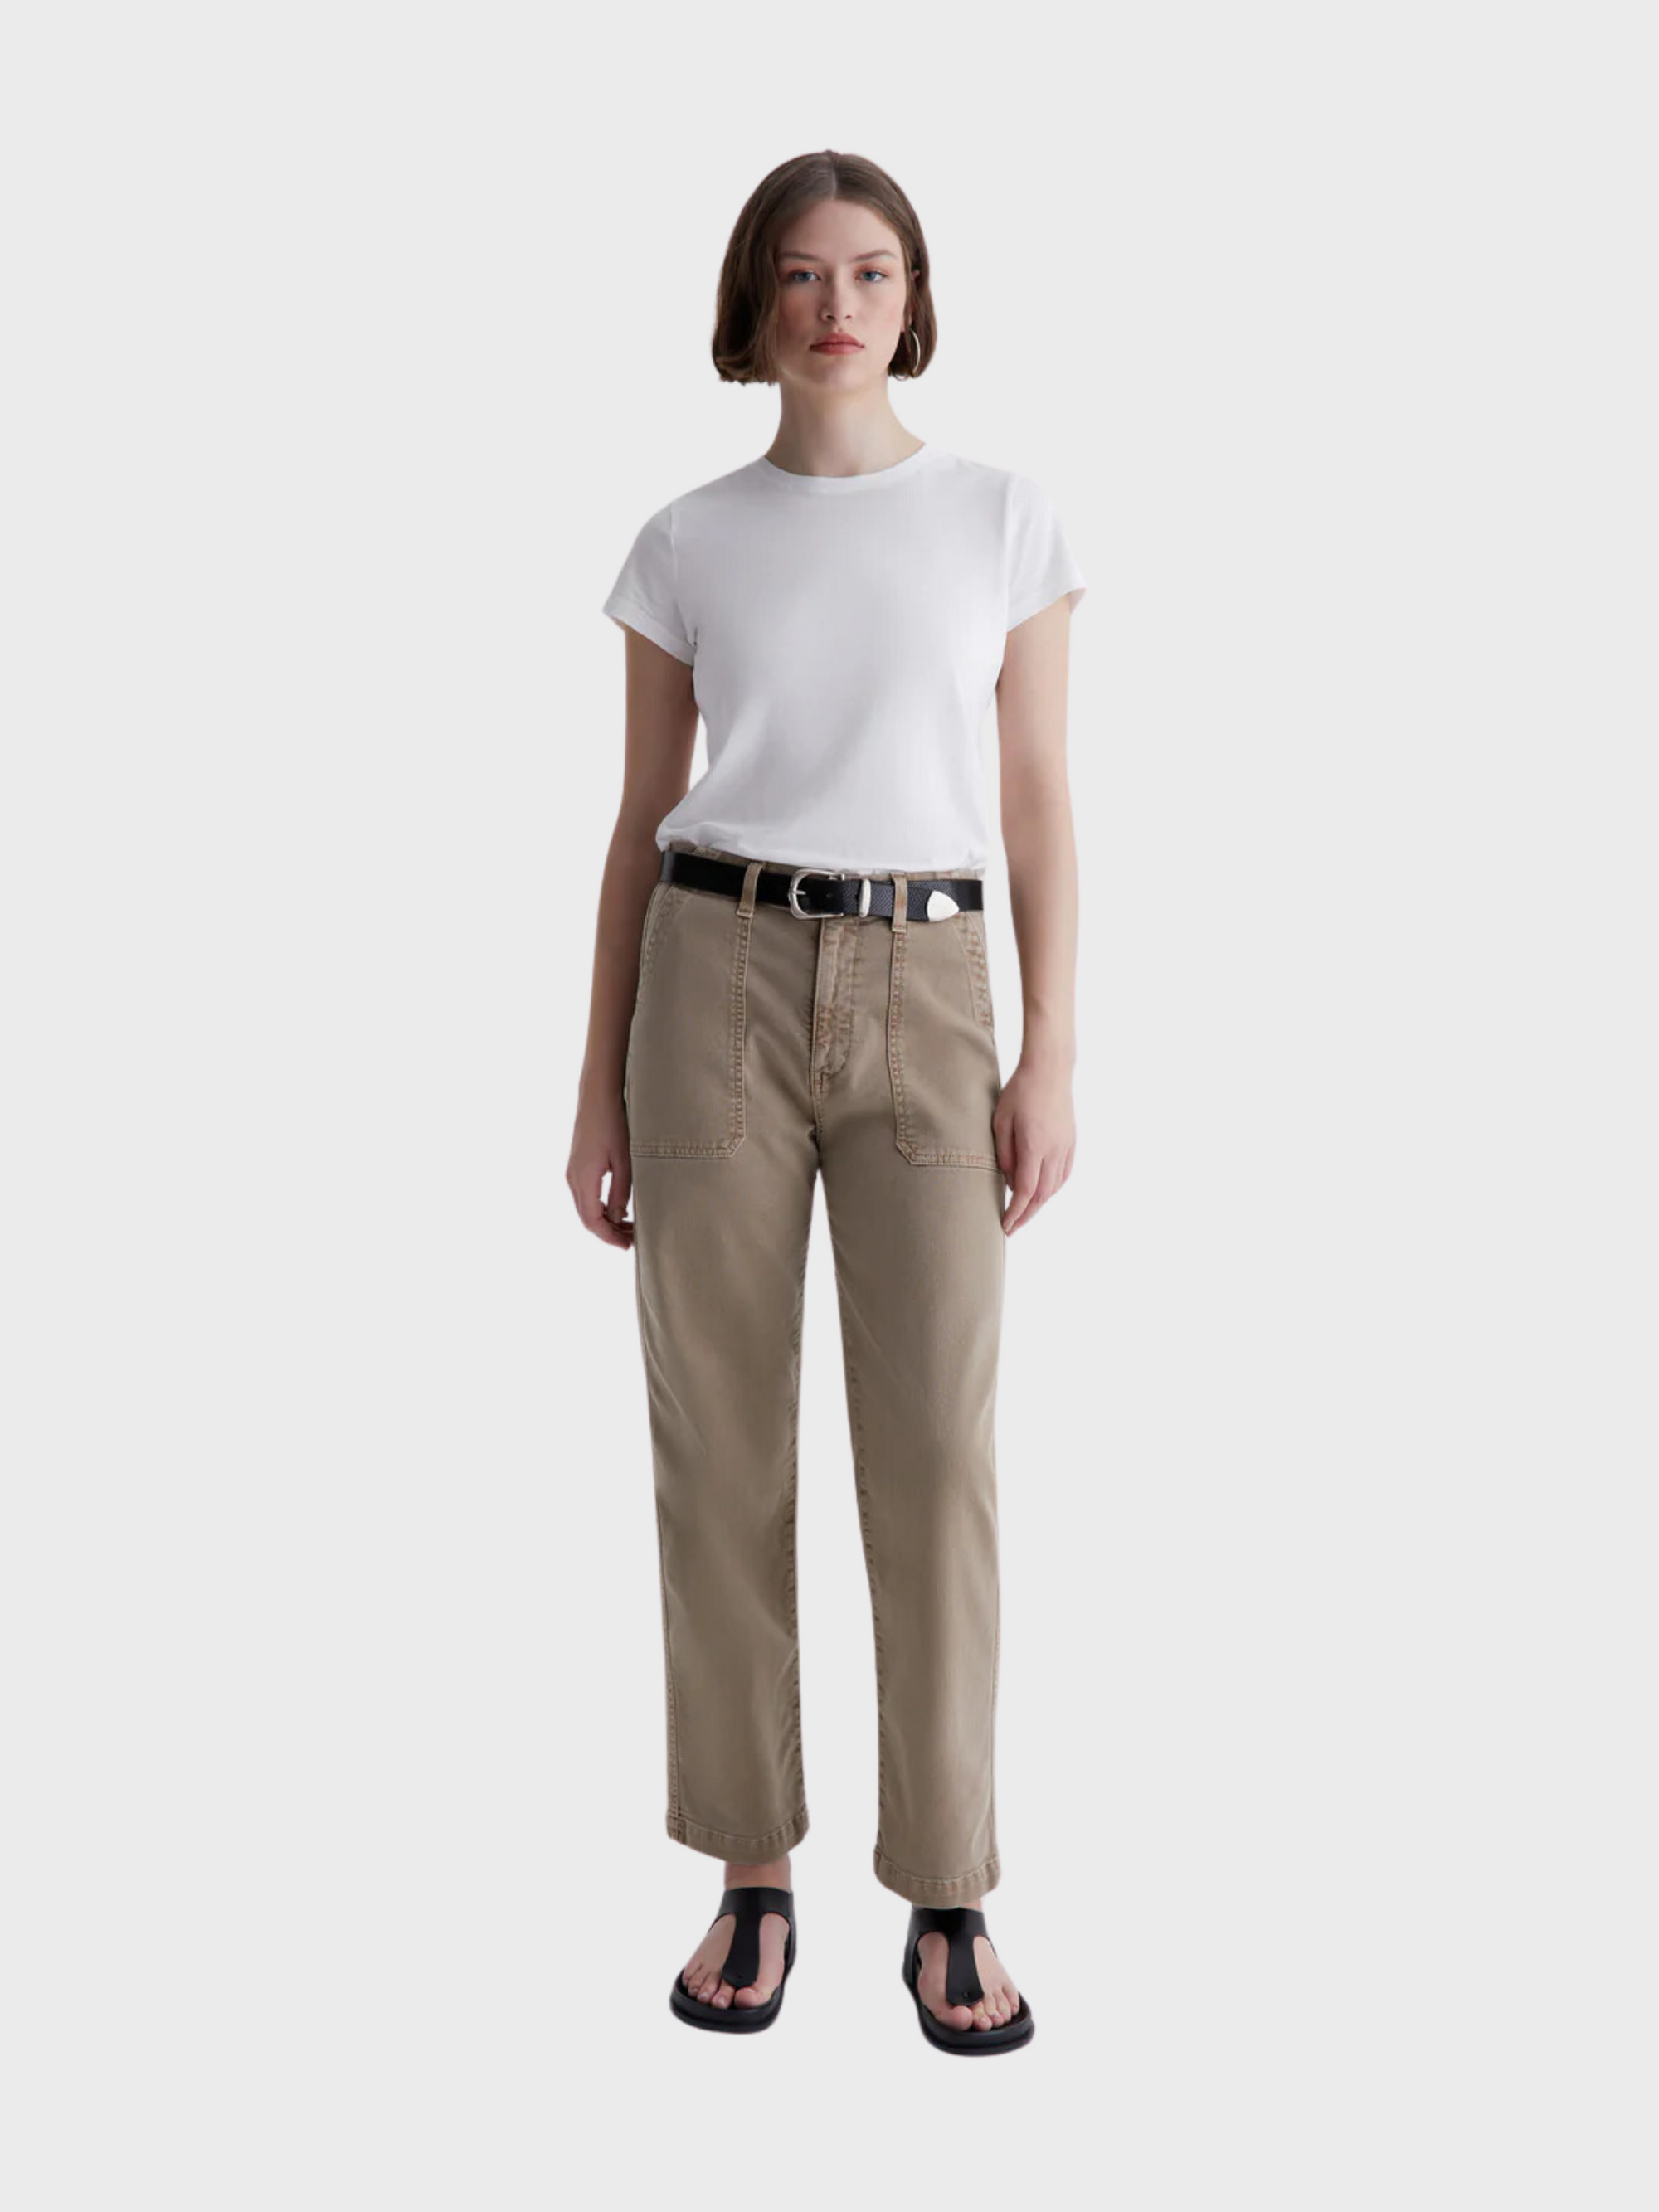 AG Analeigh Pant Sulfur Desert Taupe-Pants-24-West of Woodward Boutique-Vancouver-Canada